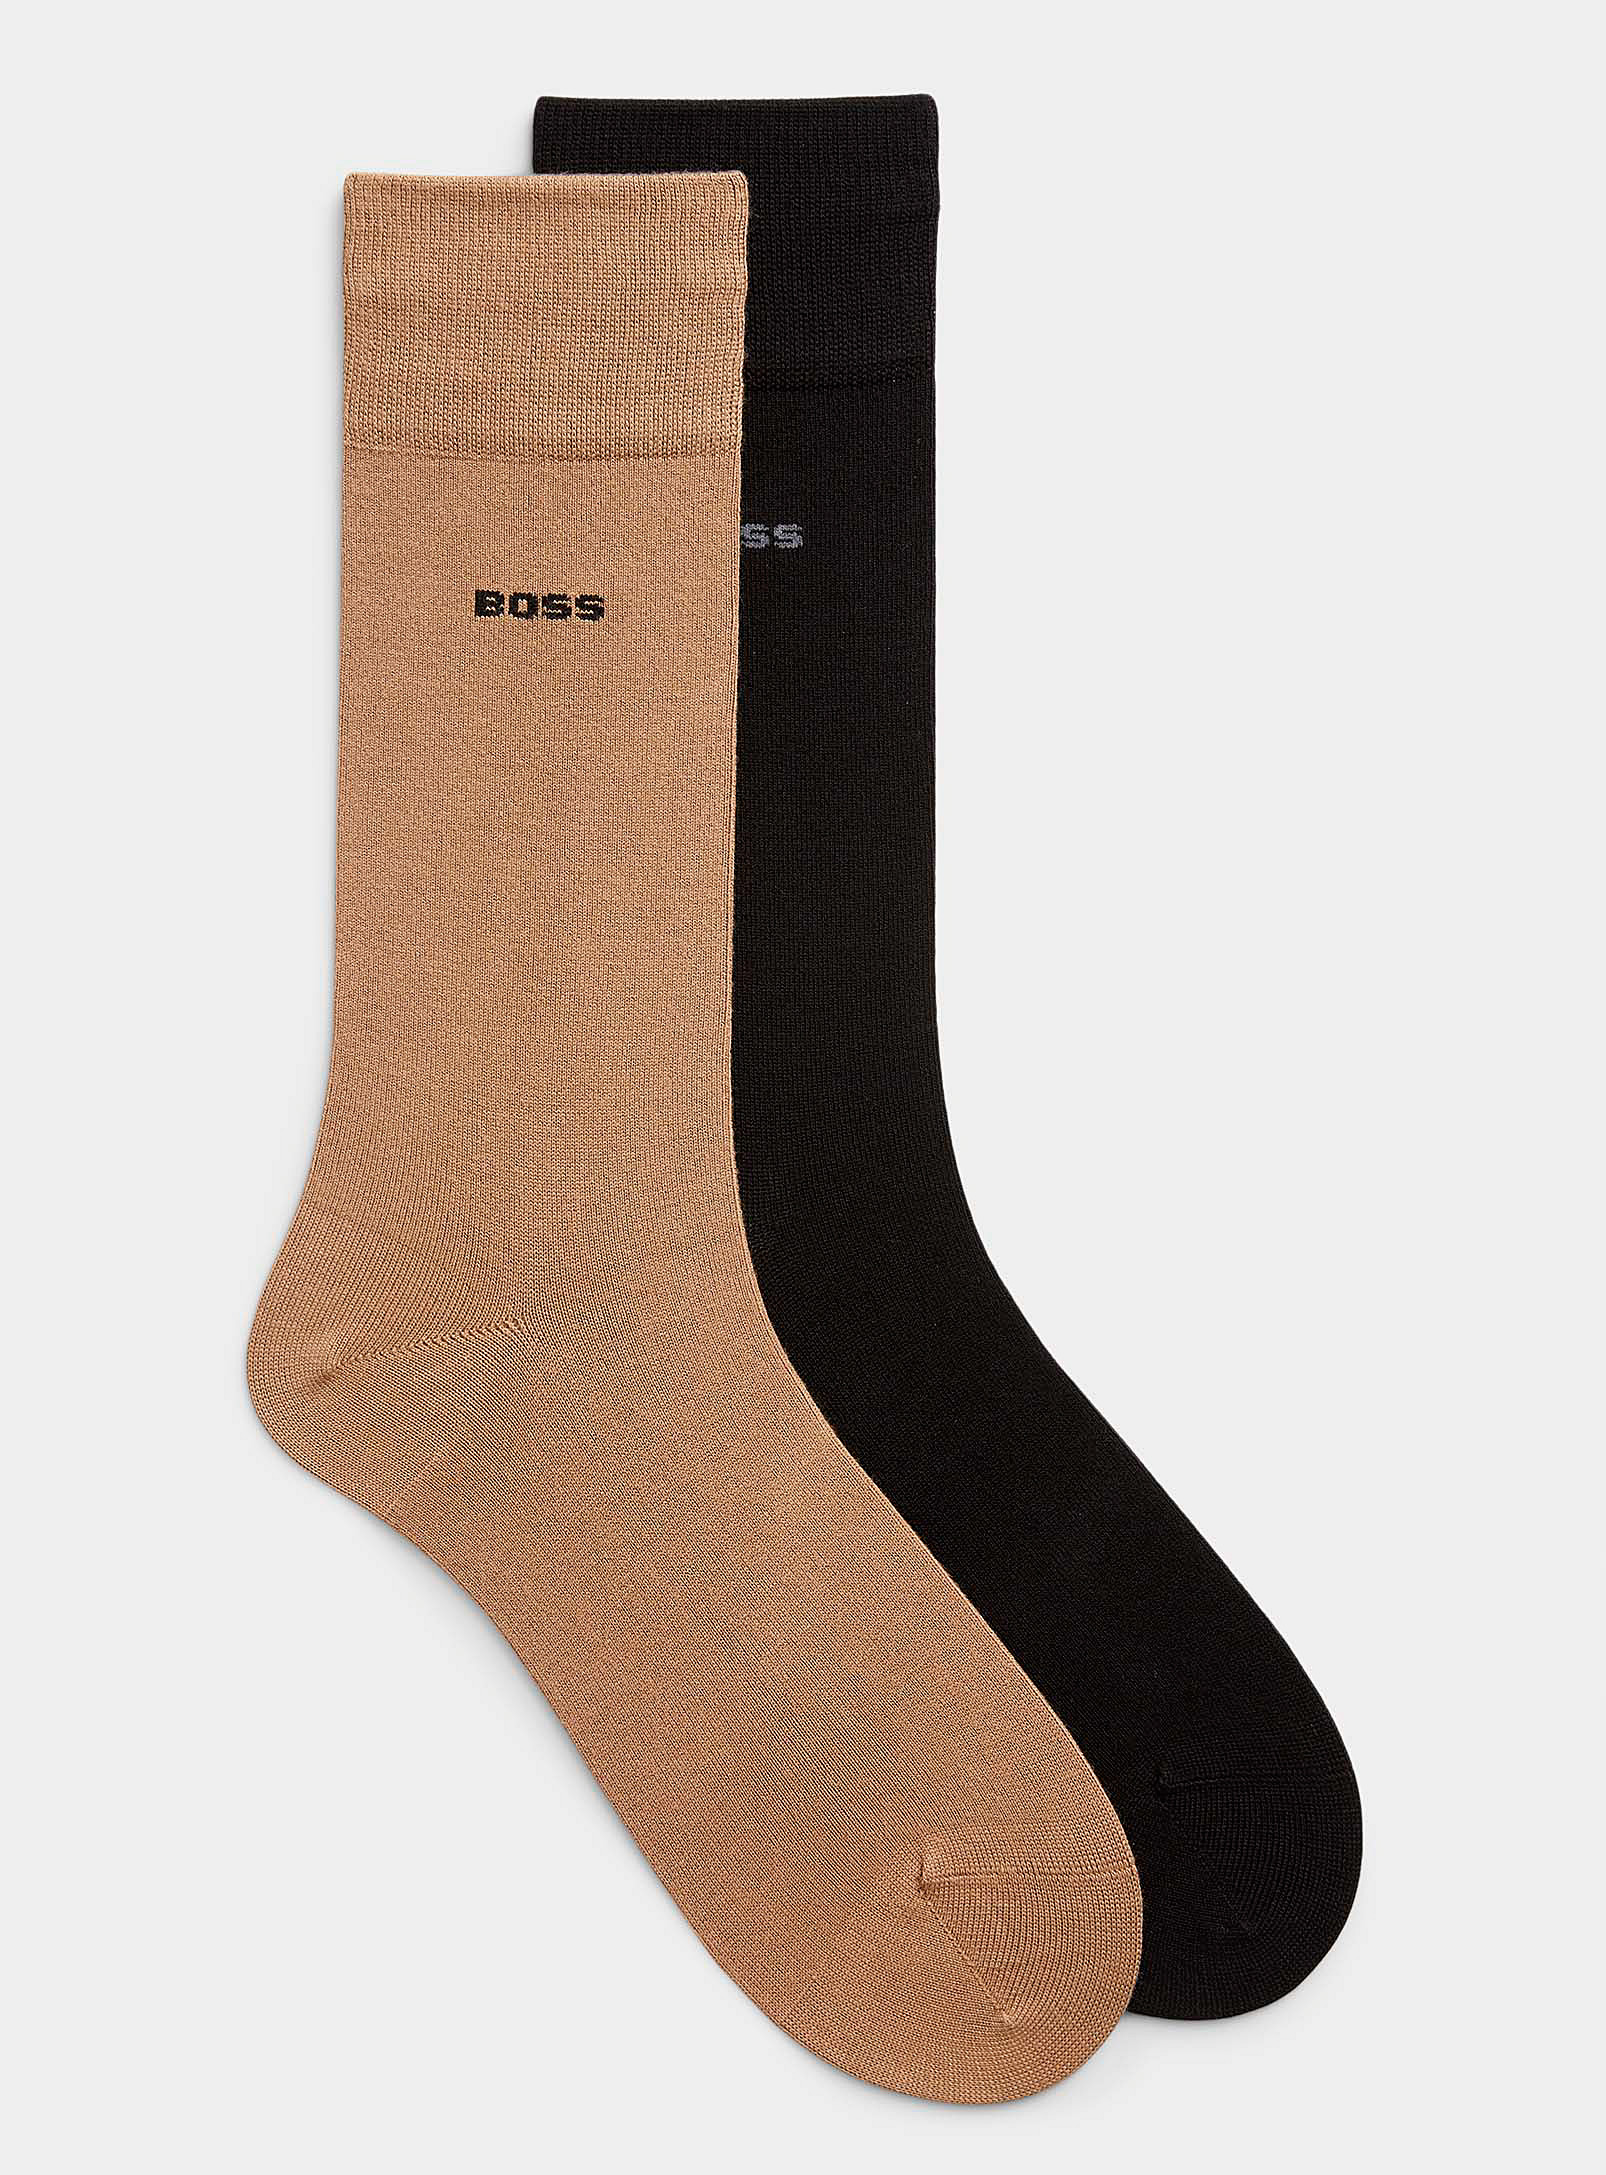 BOSS - Men's Black and beige bamboo and viscose socks 2-pack